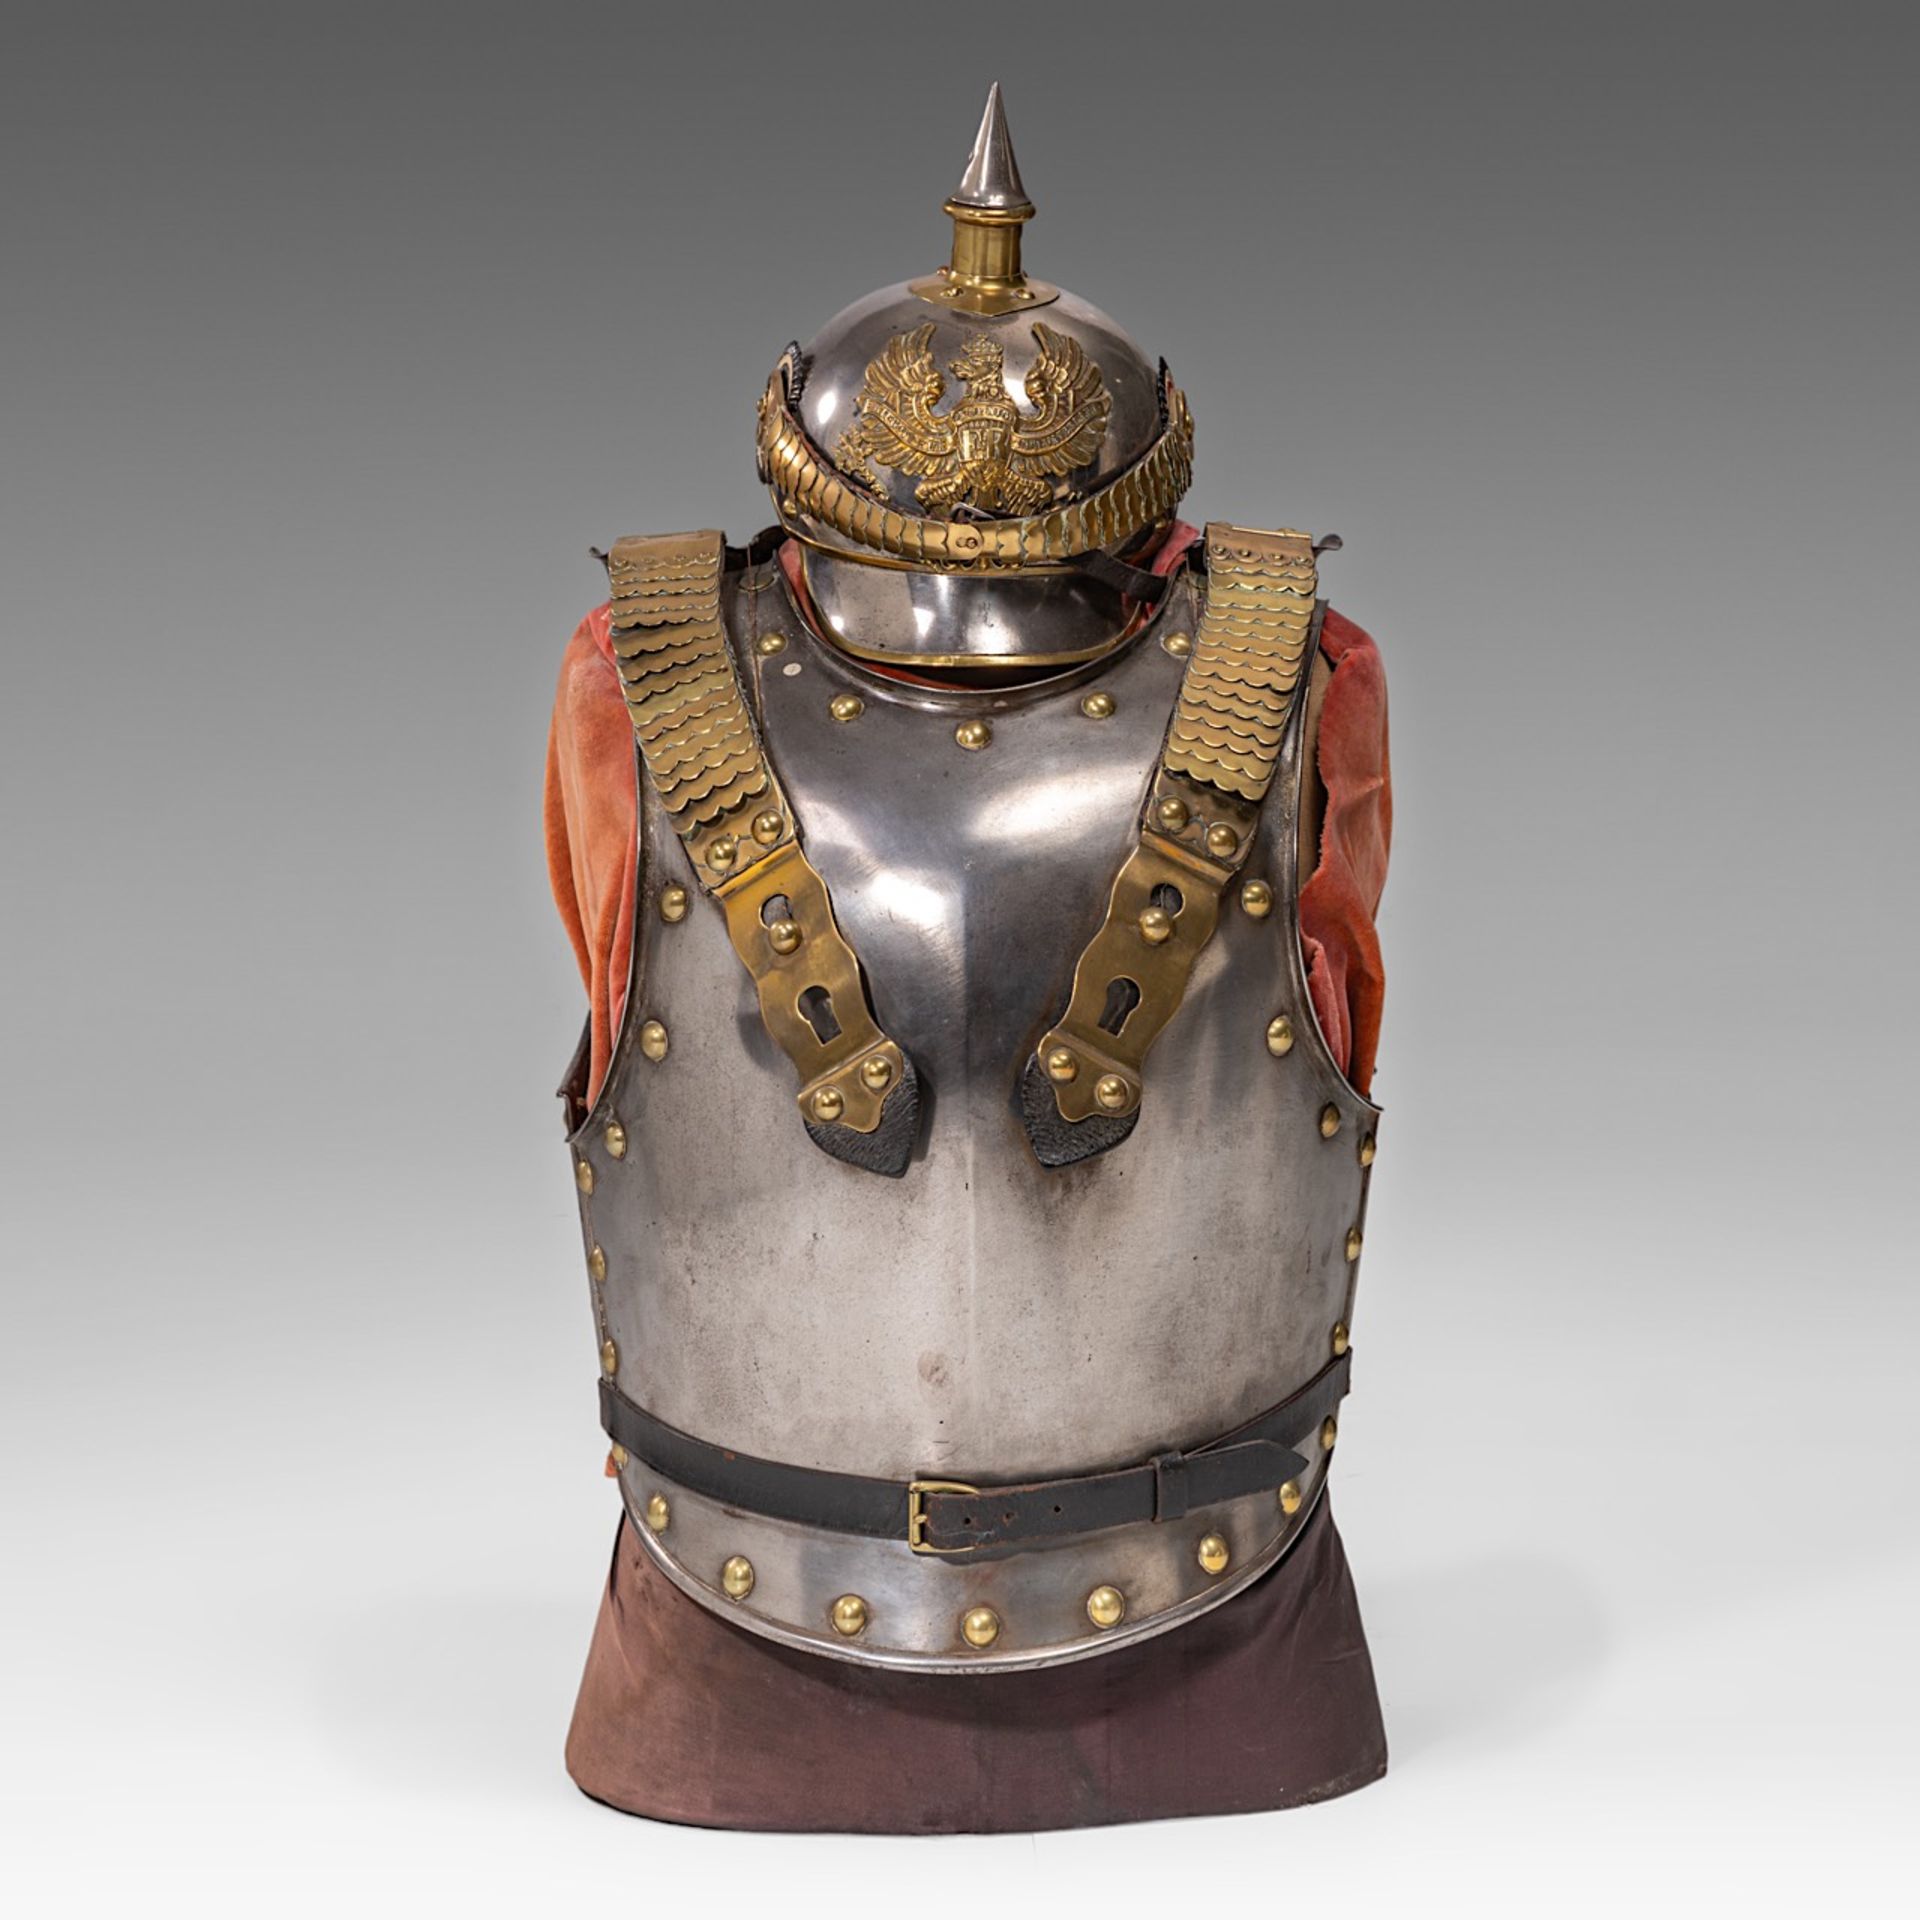 Cuirass and helmet, metal and gilded brass, 19thC., 68 x 30 x 36 cm. (26.7 x 11.8 x 14.1 in.) - Image 2 of 8